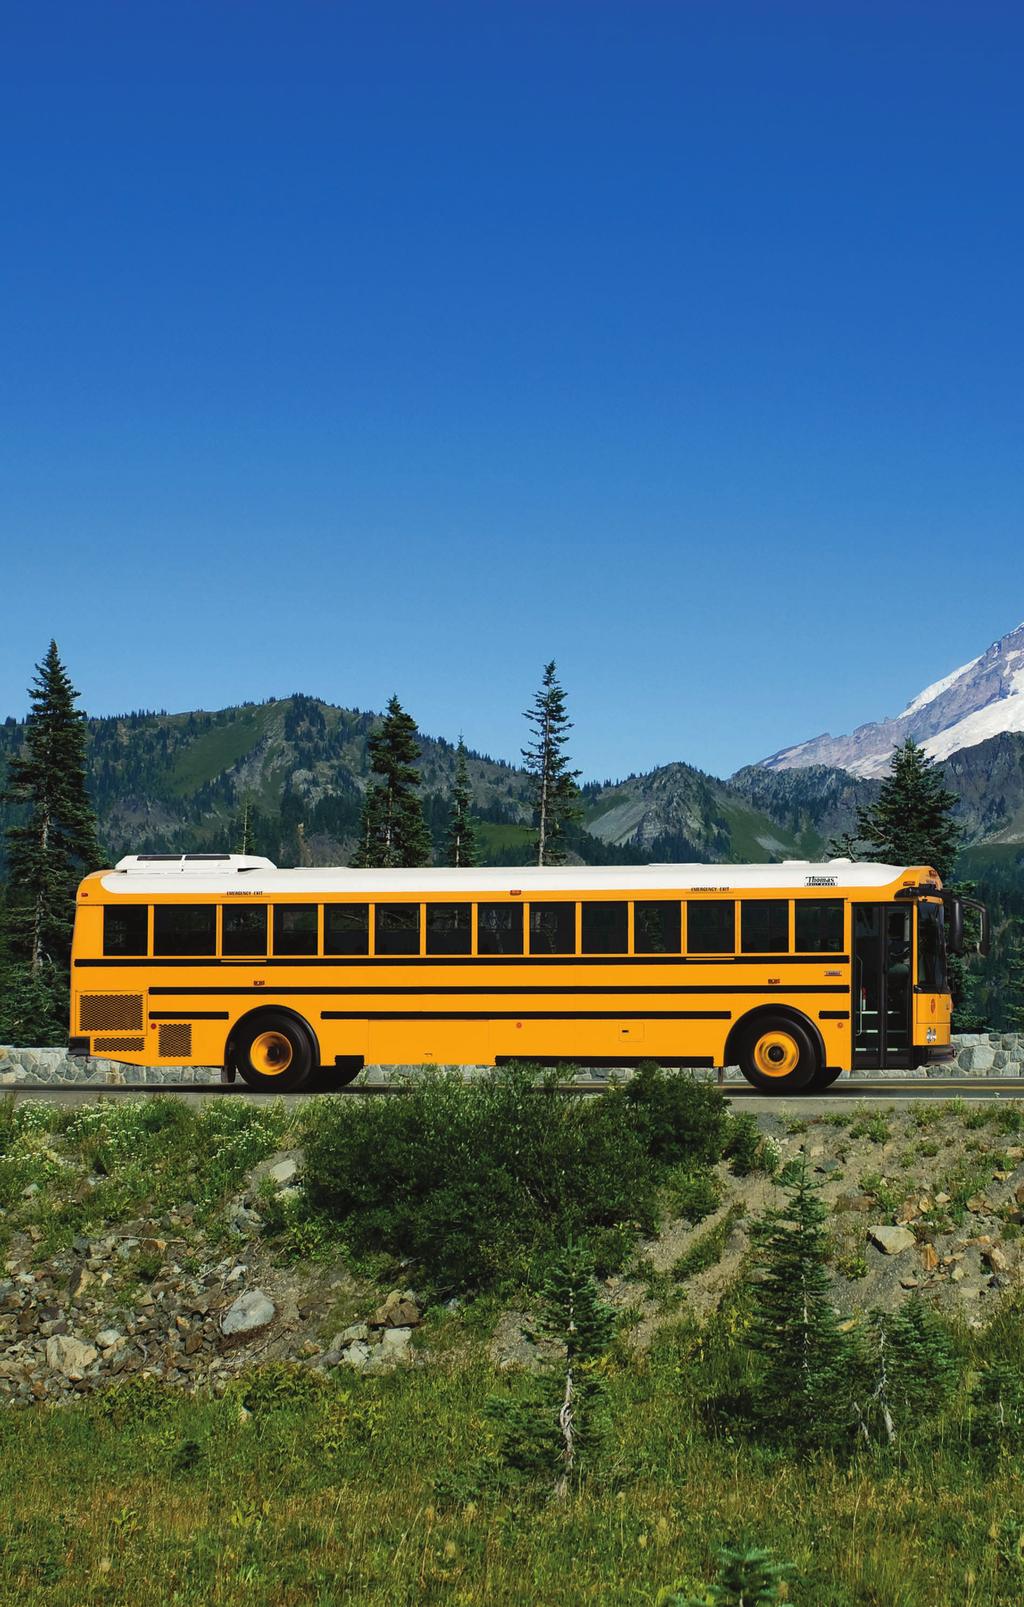 Thomas Built Buses is committed to building buses that give you peace of mind, day after day, mile after mile.